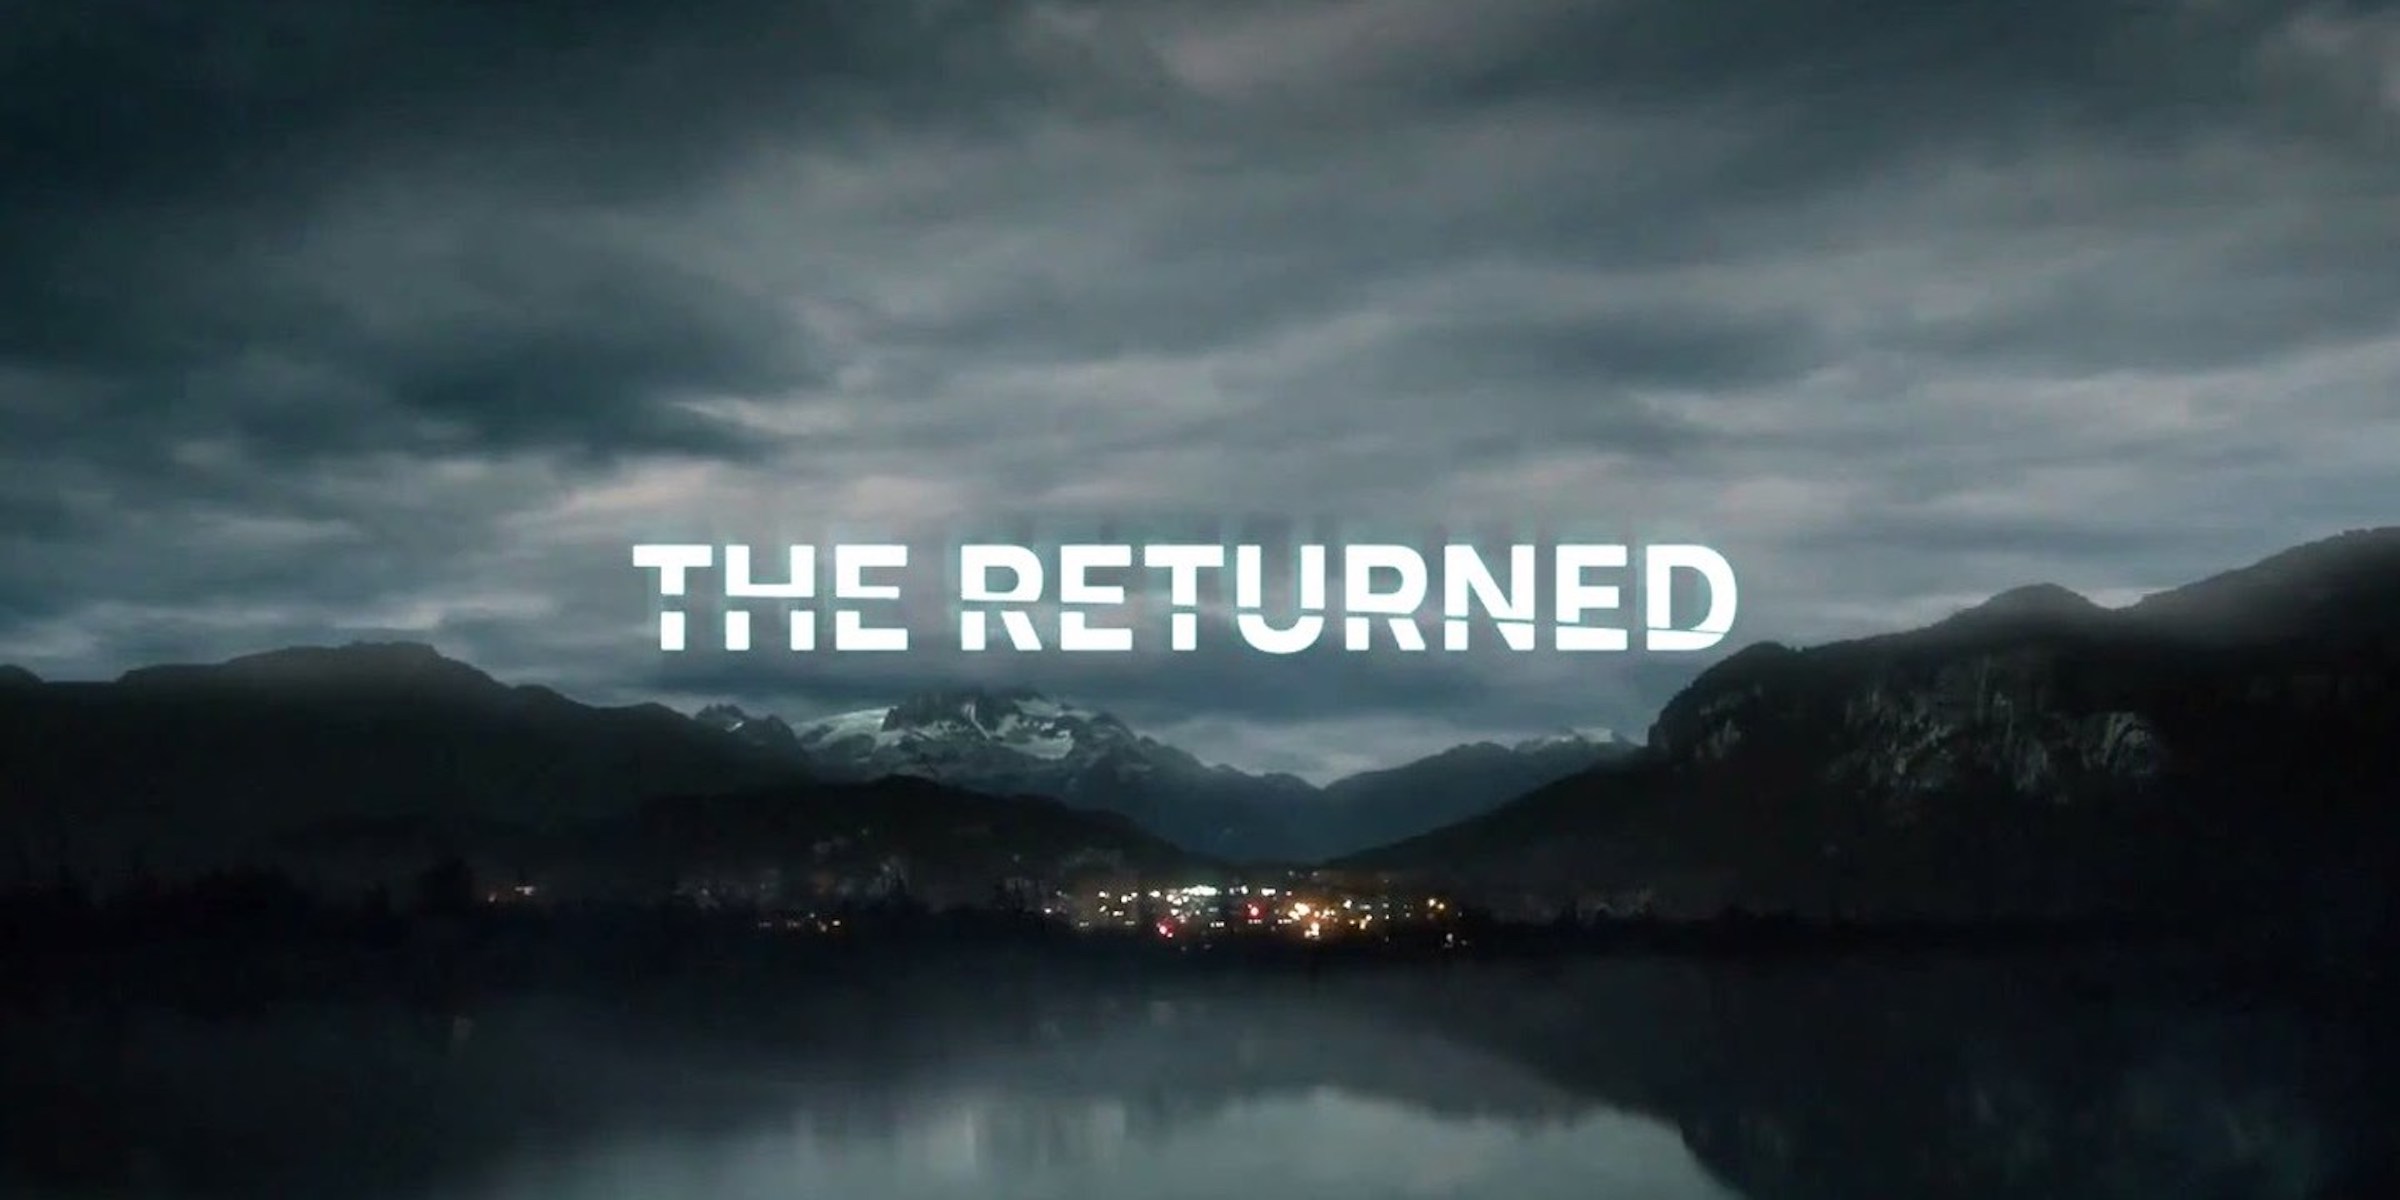 The returned watch